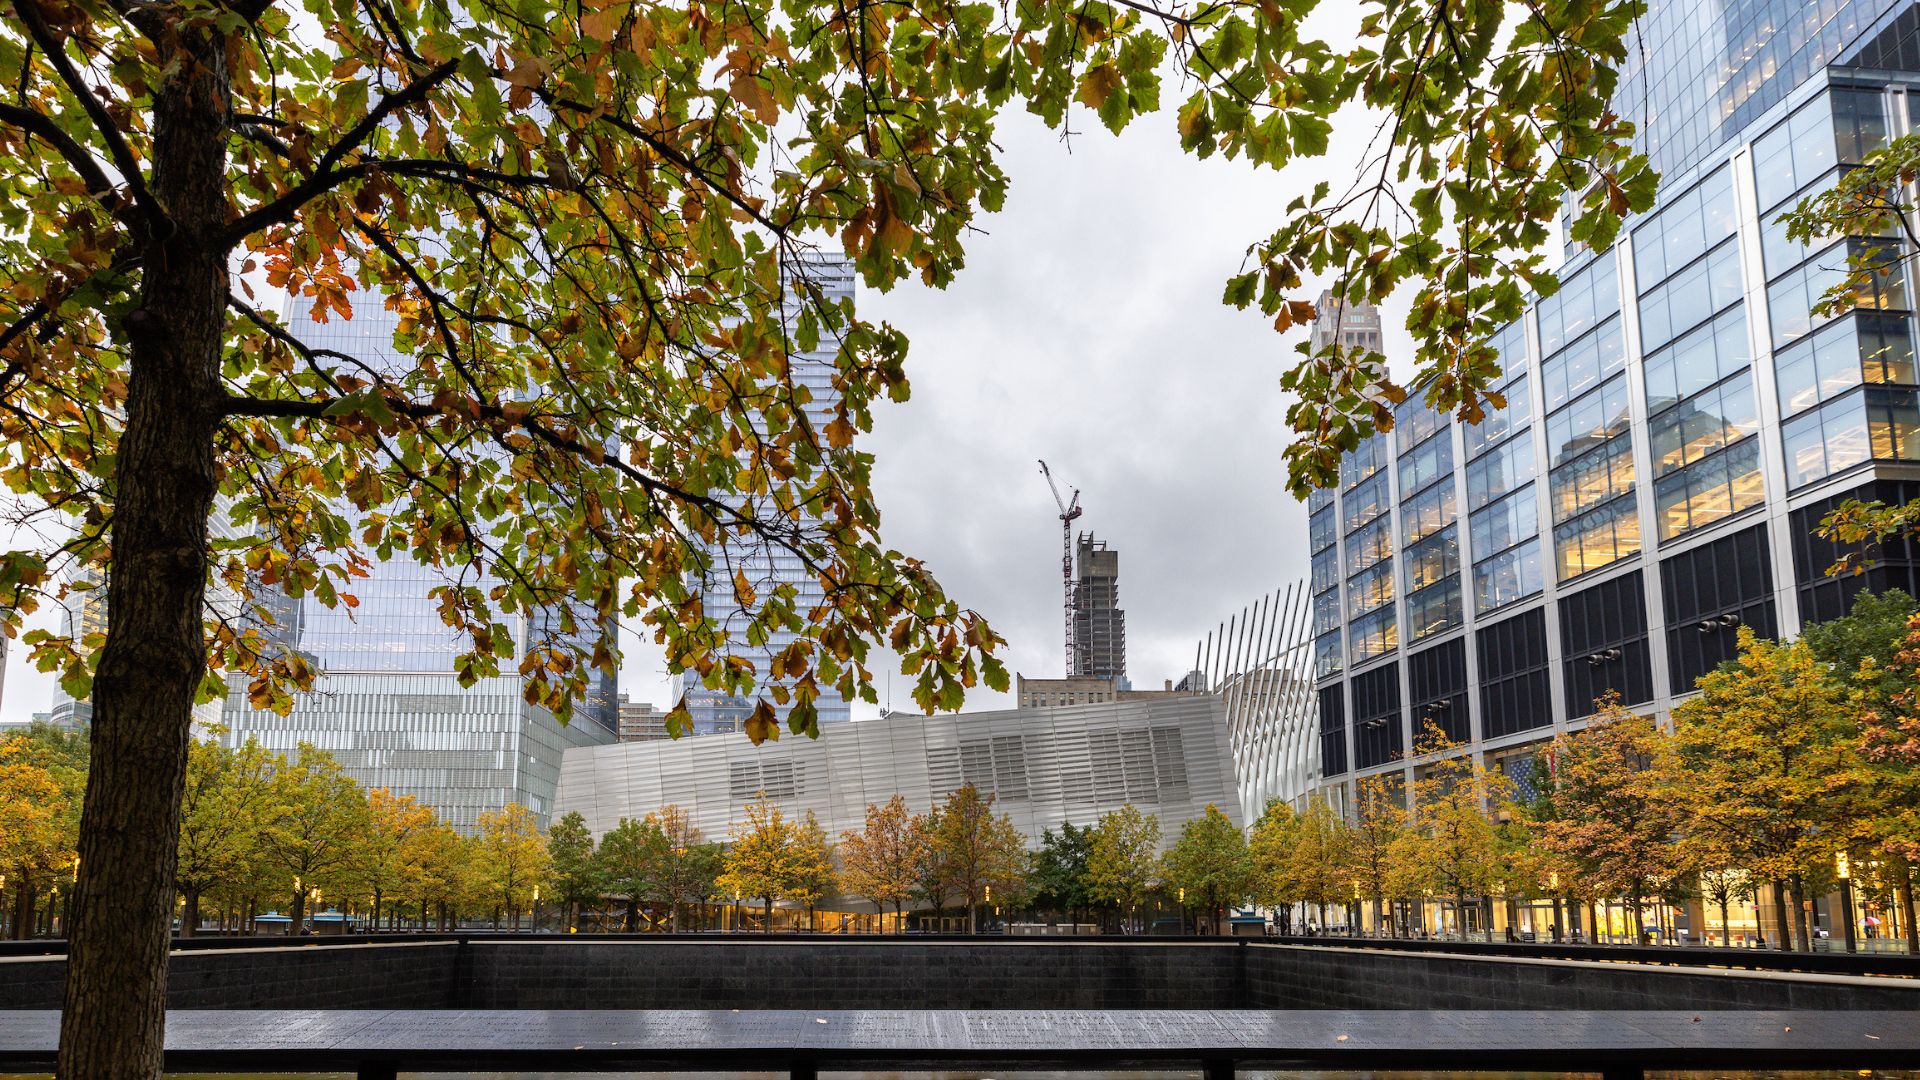 Fall foliage surrounds the Memorial, with the Museum in the background